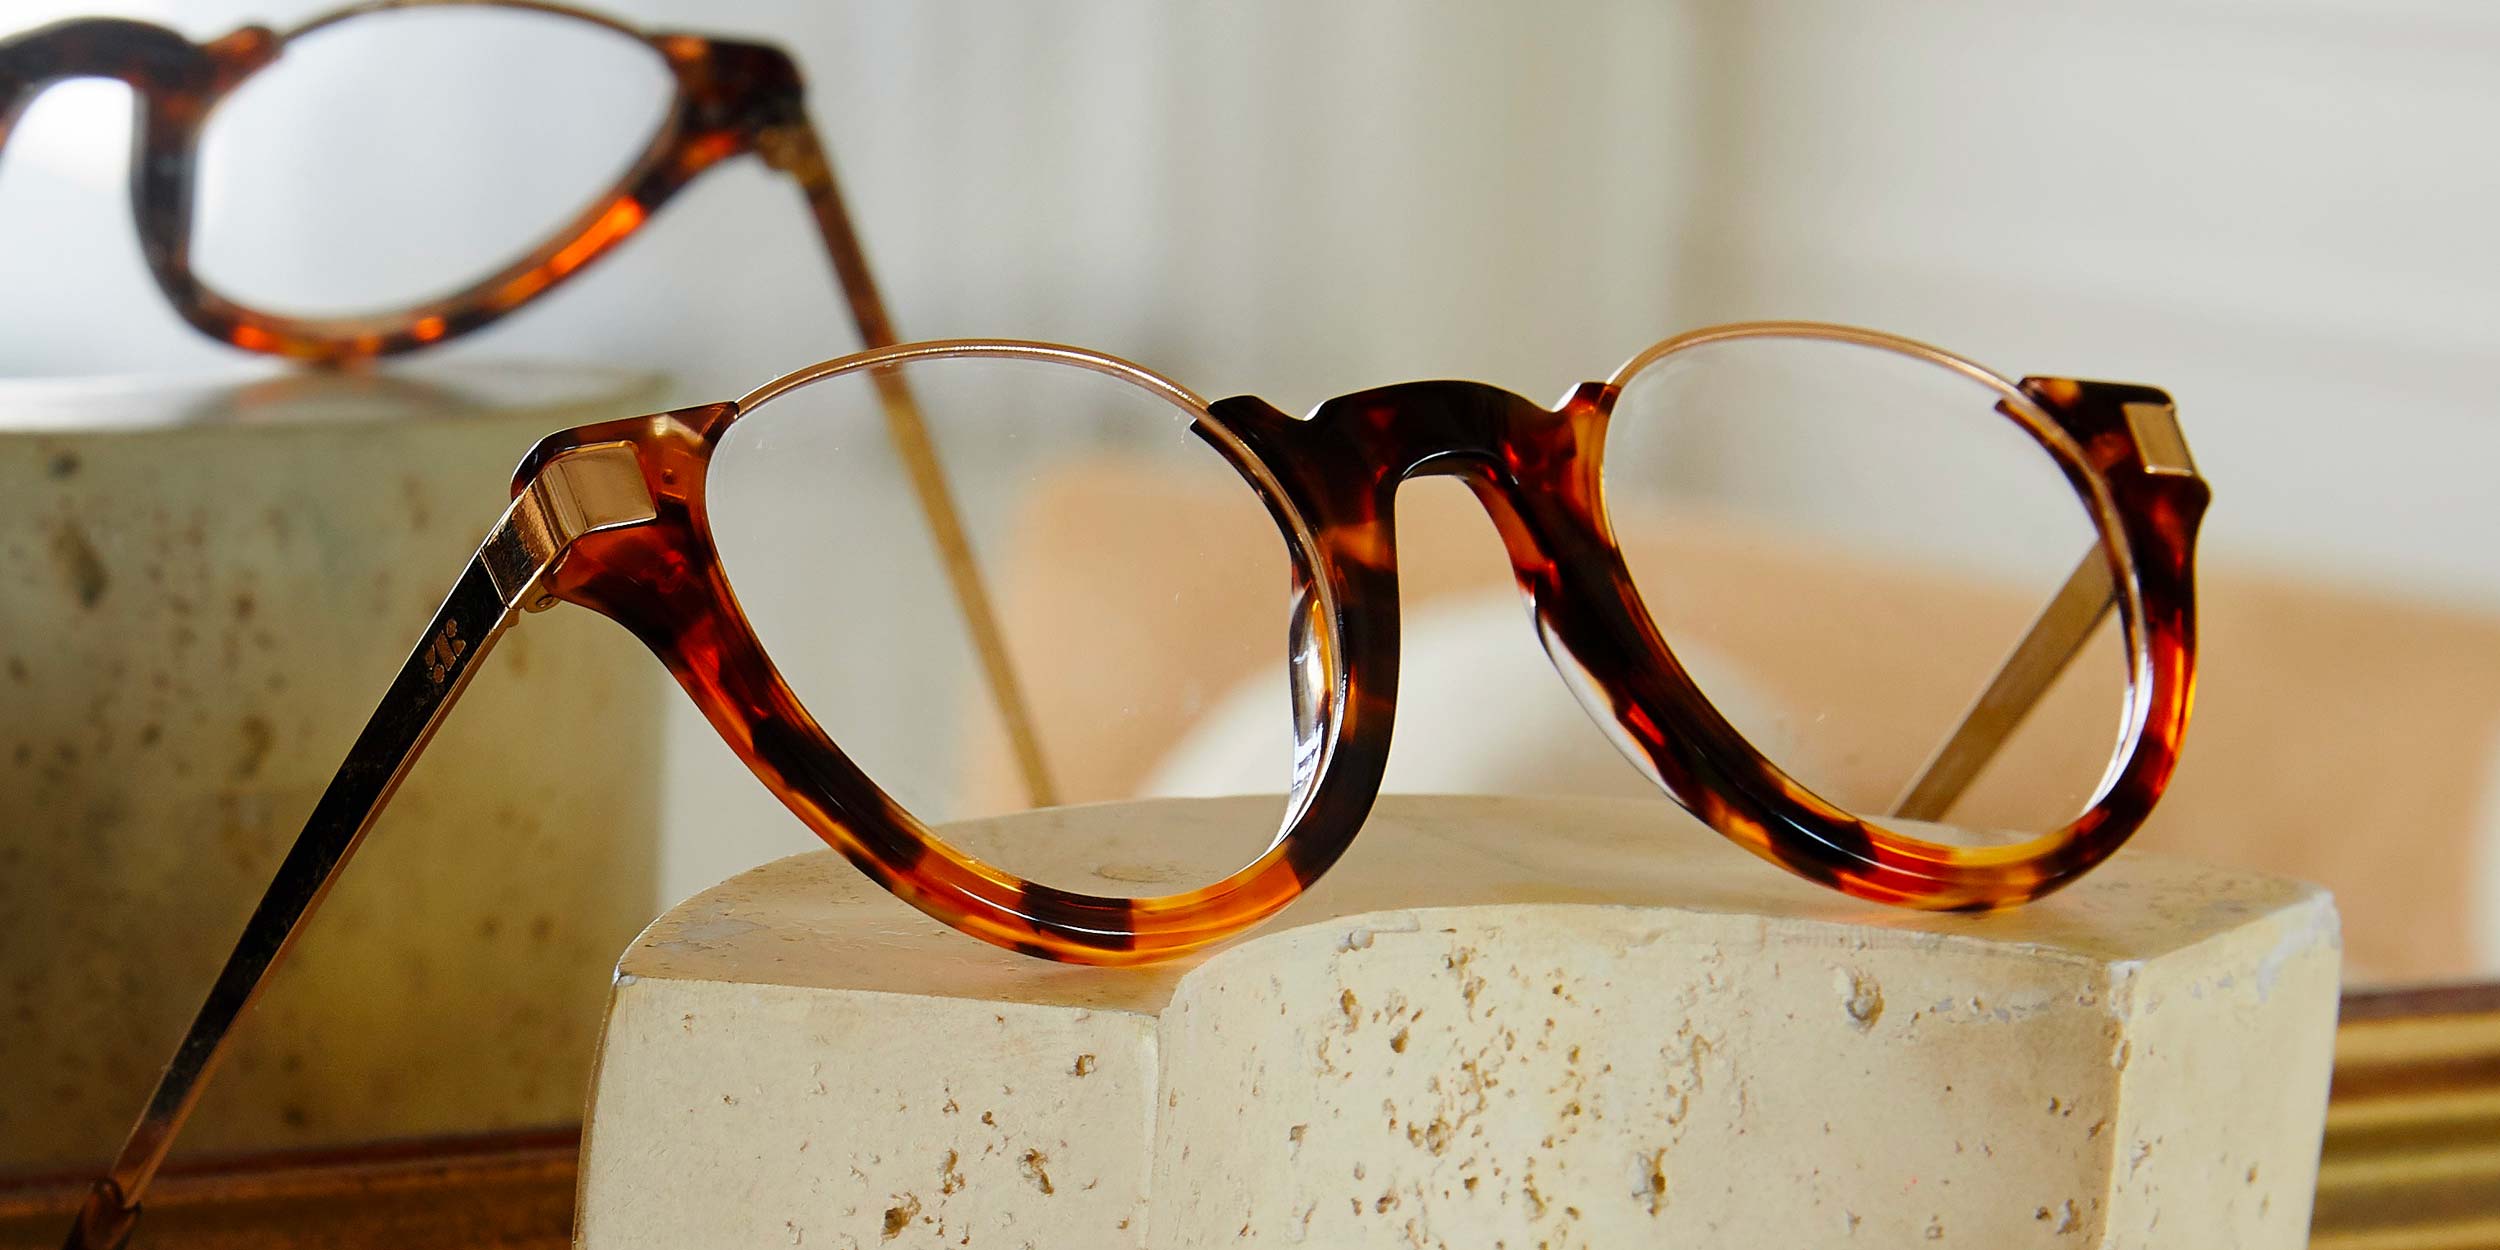 Photo Details of Charlie Black & Silver Reading Glasses in a room